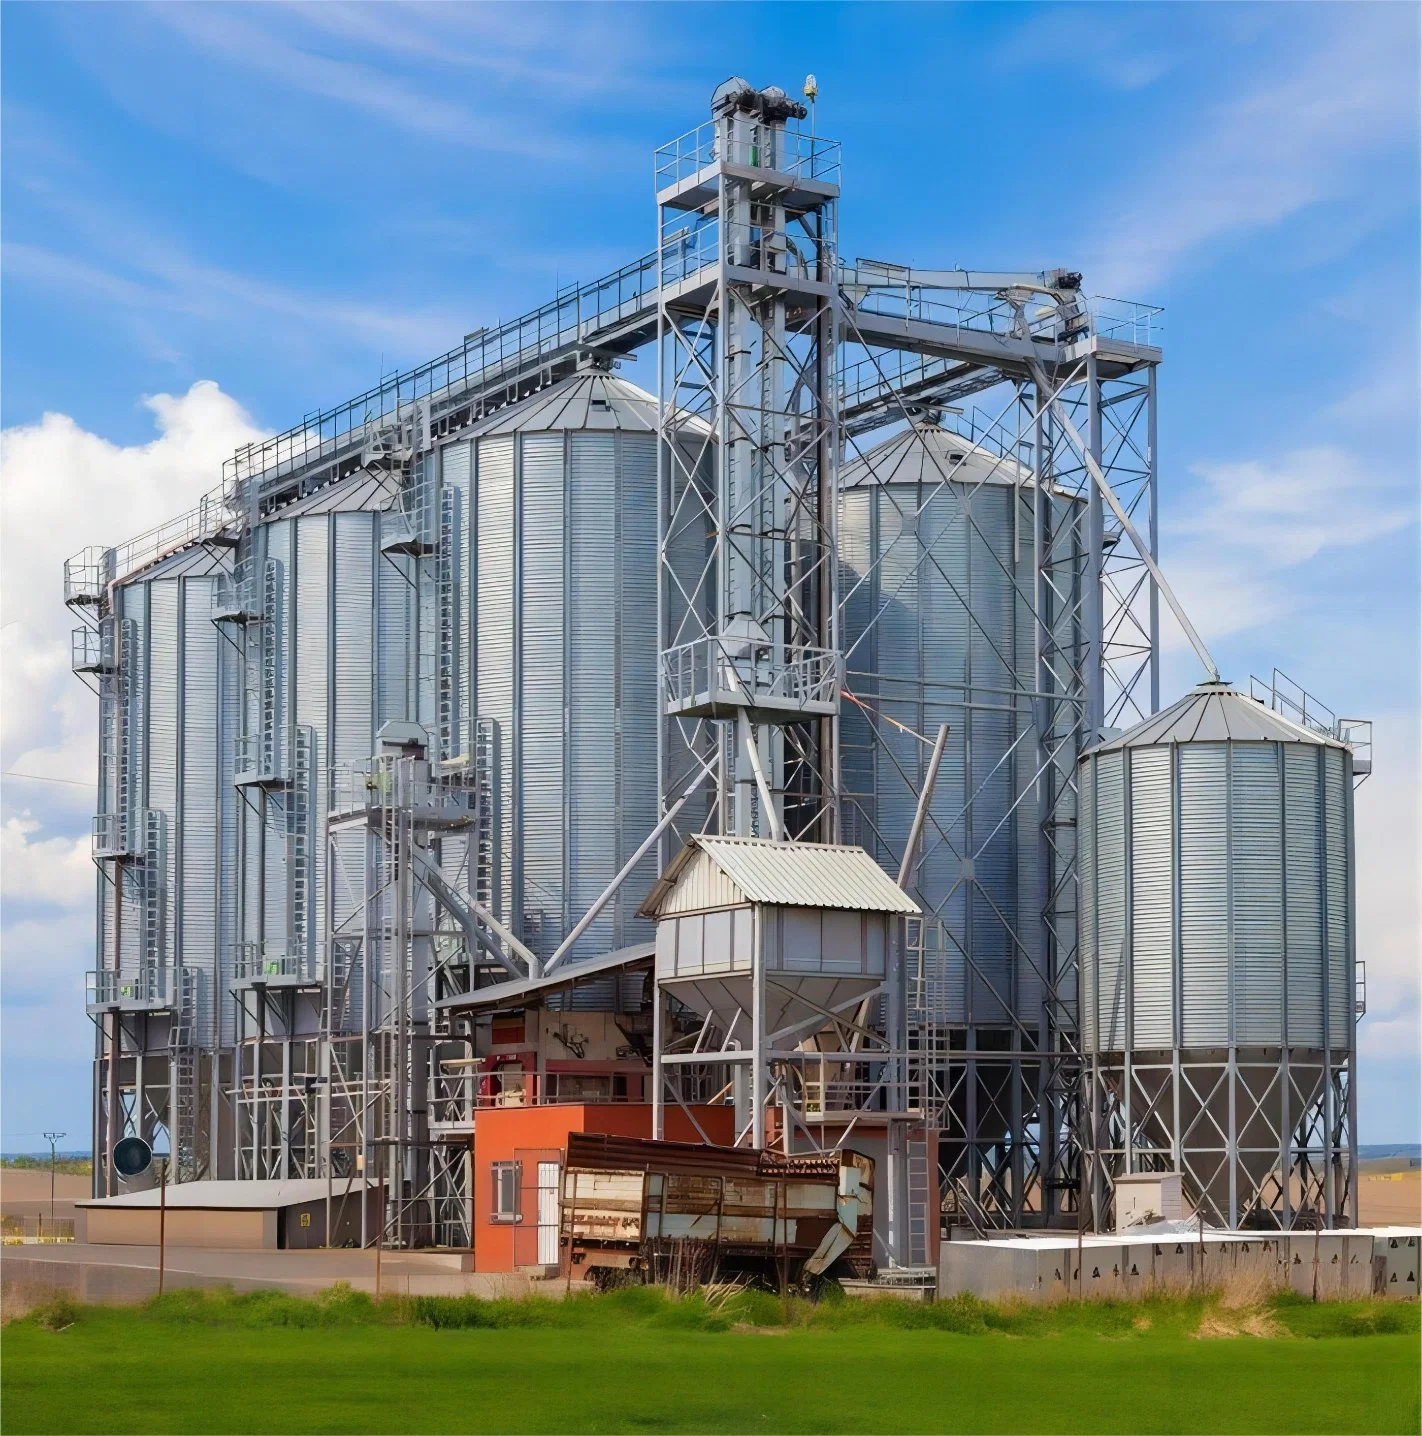 Good Quality Agricultural Cereal Storage Maize Wheat Paddy Corn Grain Galvanized Steel Silo